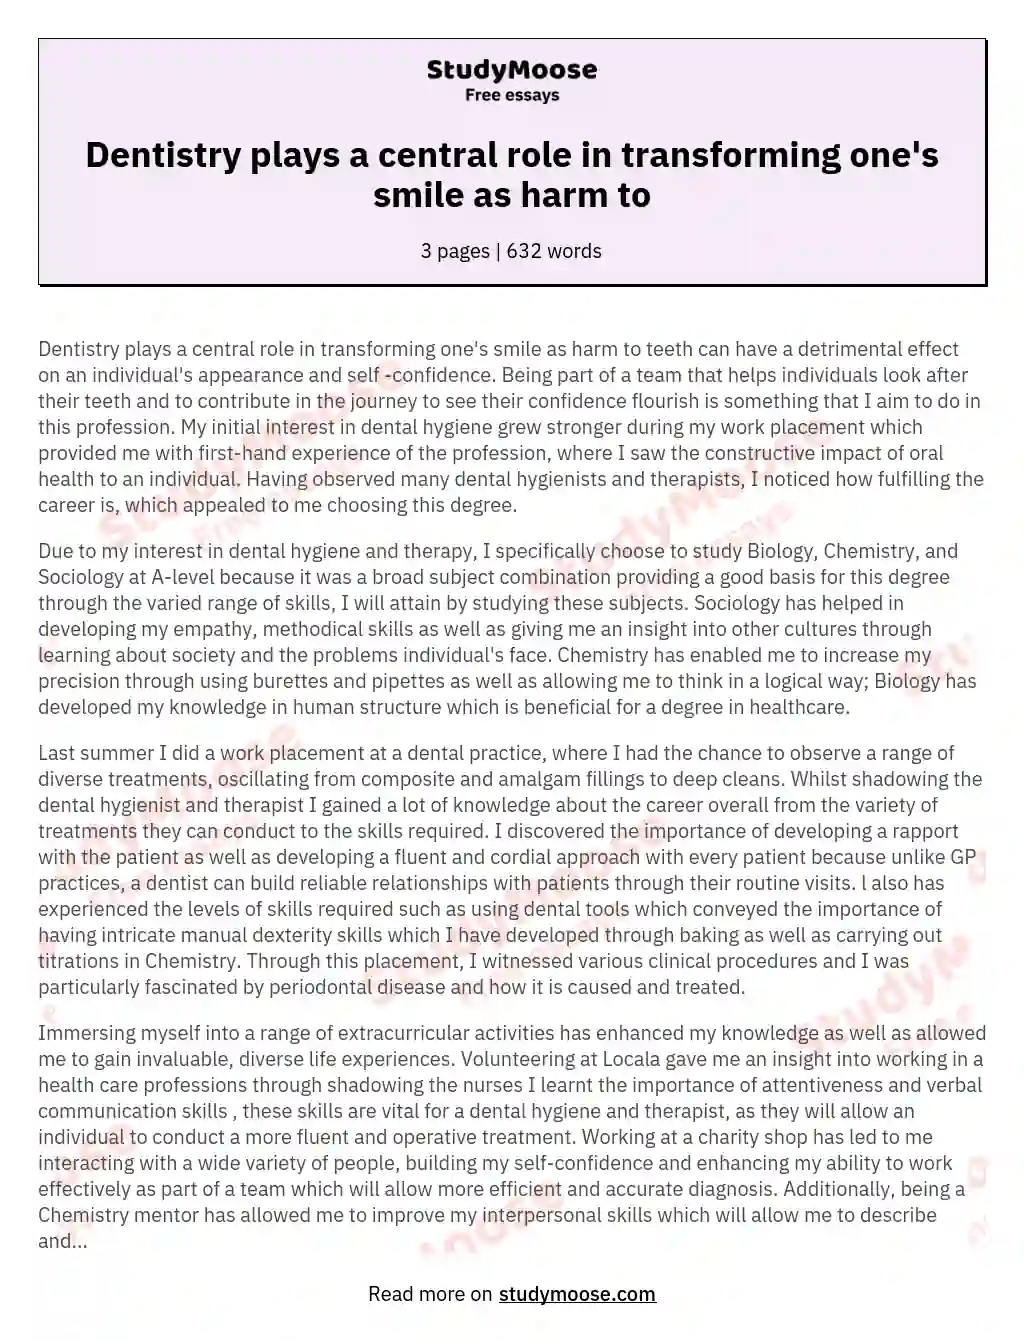 Dentistry plays a central role in transforming one's smile as harm to